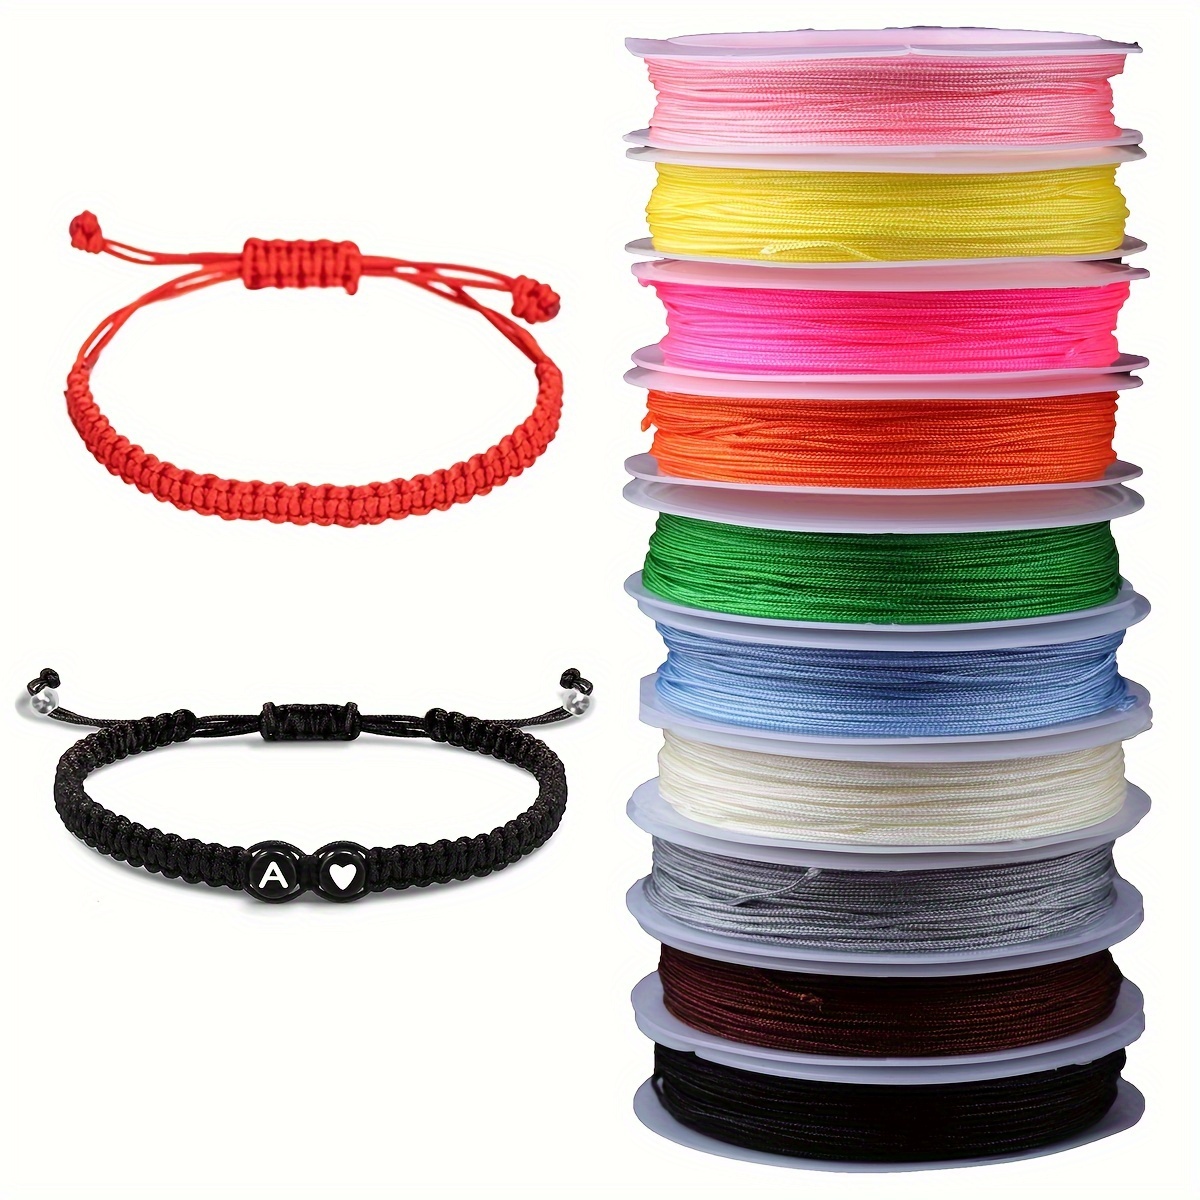 

10 Rolls Nylon Cord Set - Chinese Knotting Thread For Diy Jewelry Making, Inelastic Beading Cords For Bracelets, Necklaces, Anklets - Mixed Colors